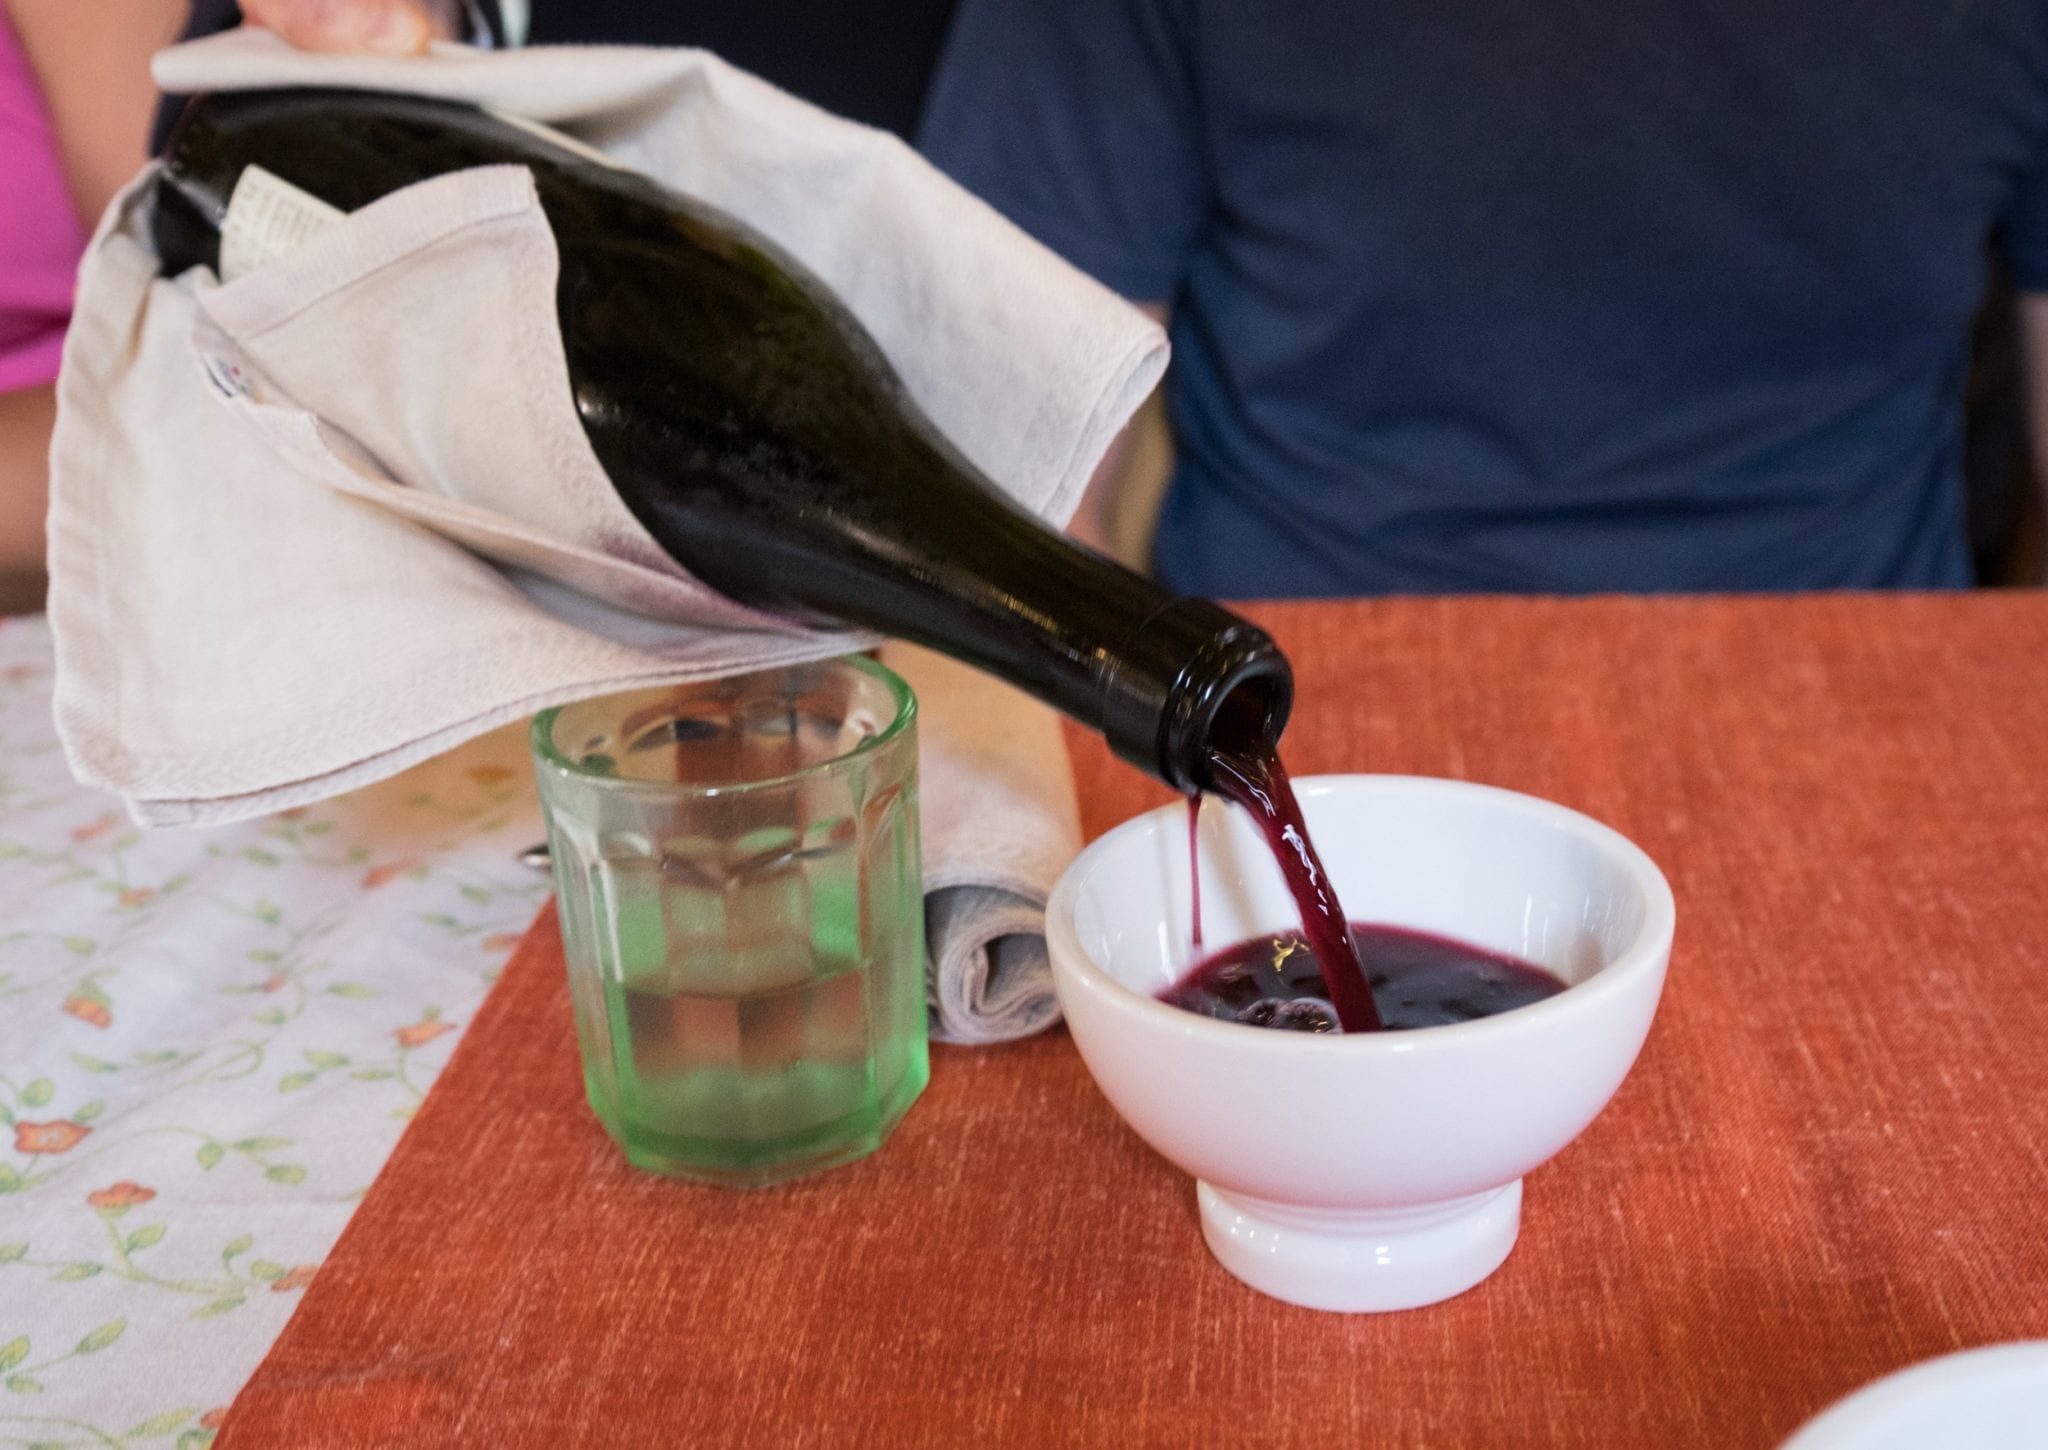 A bottle of red wine being poured into a small white bowl for drinking.